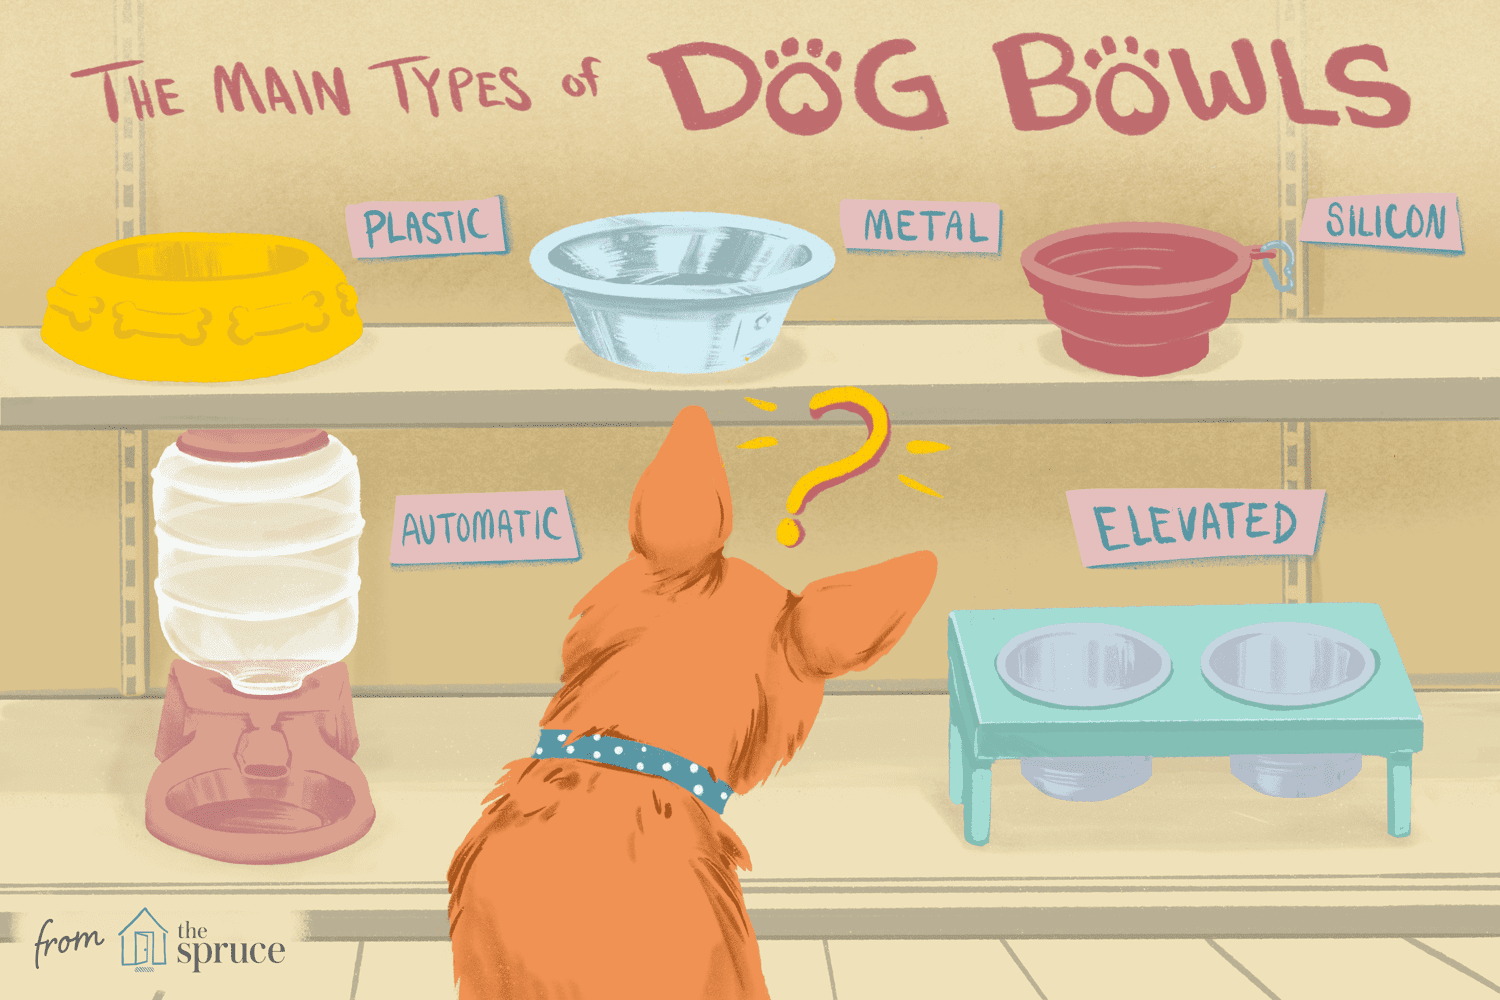 A graphic of a dog being confused of the many types of dog bowls